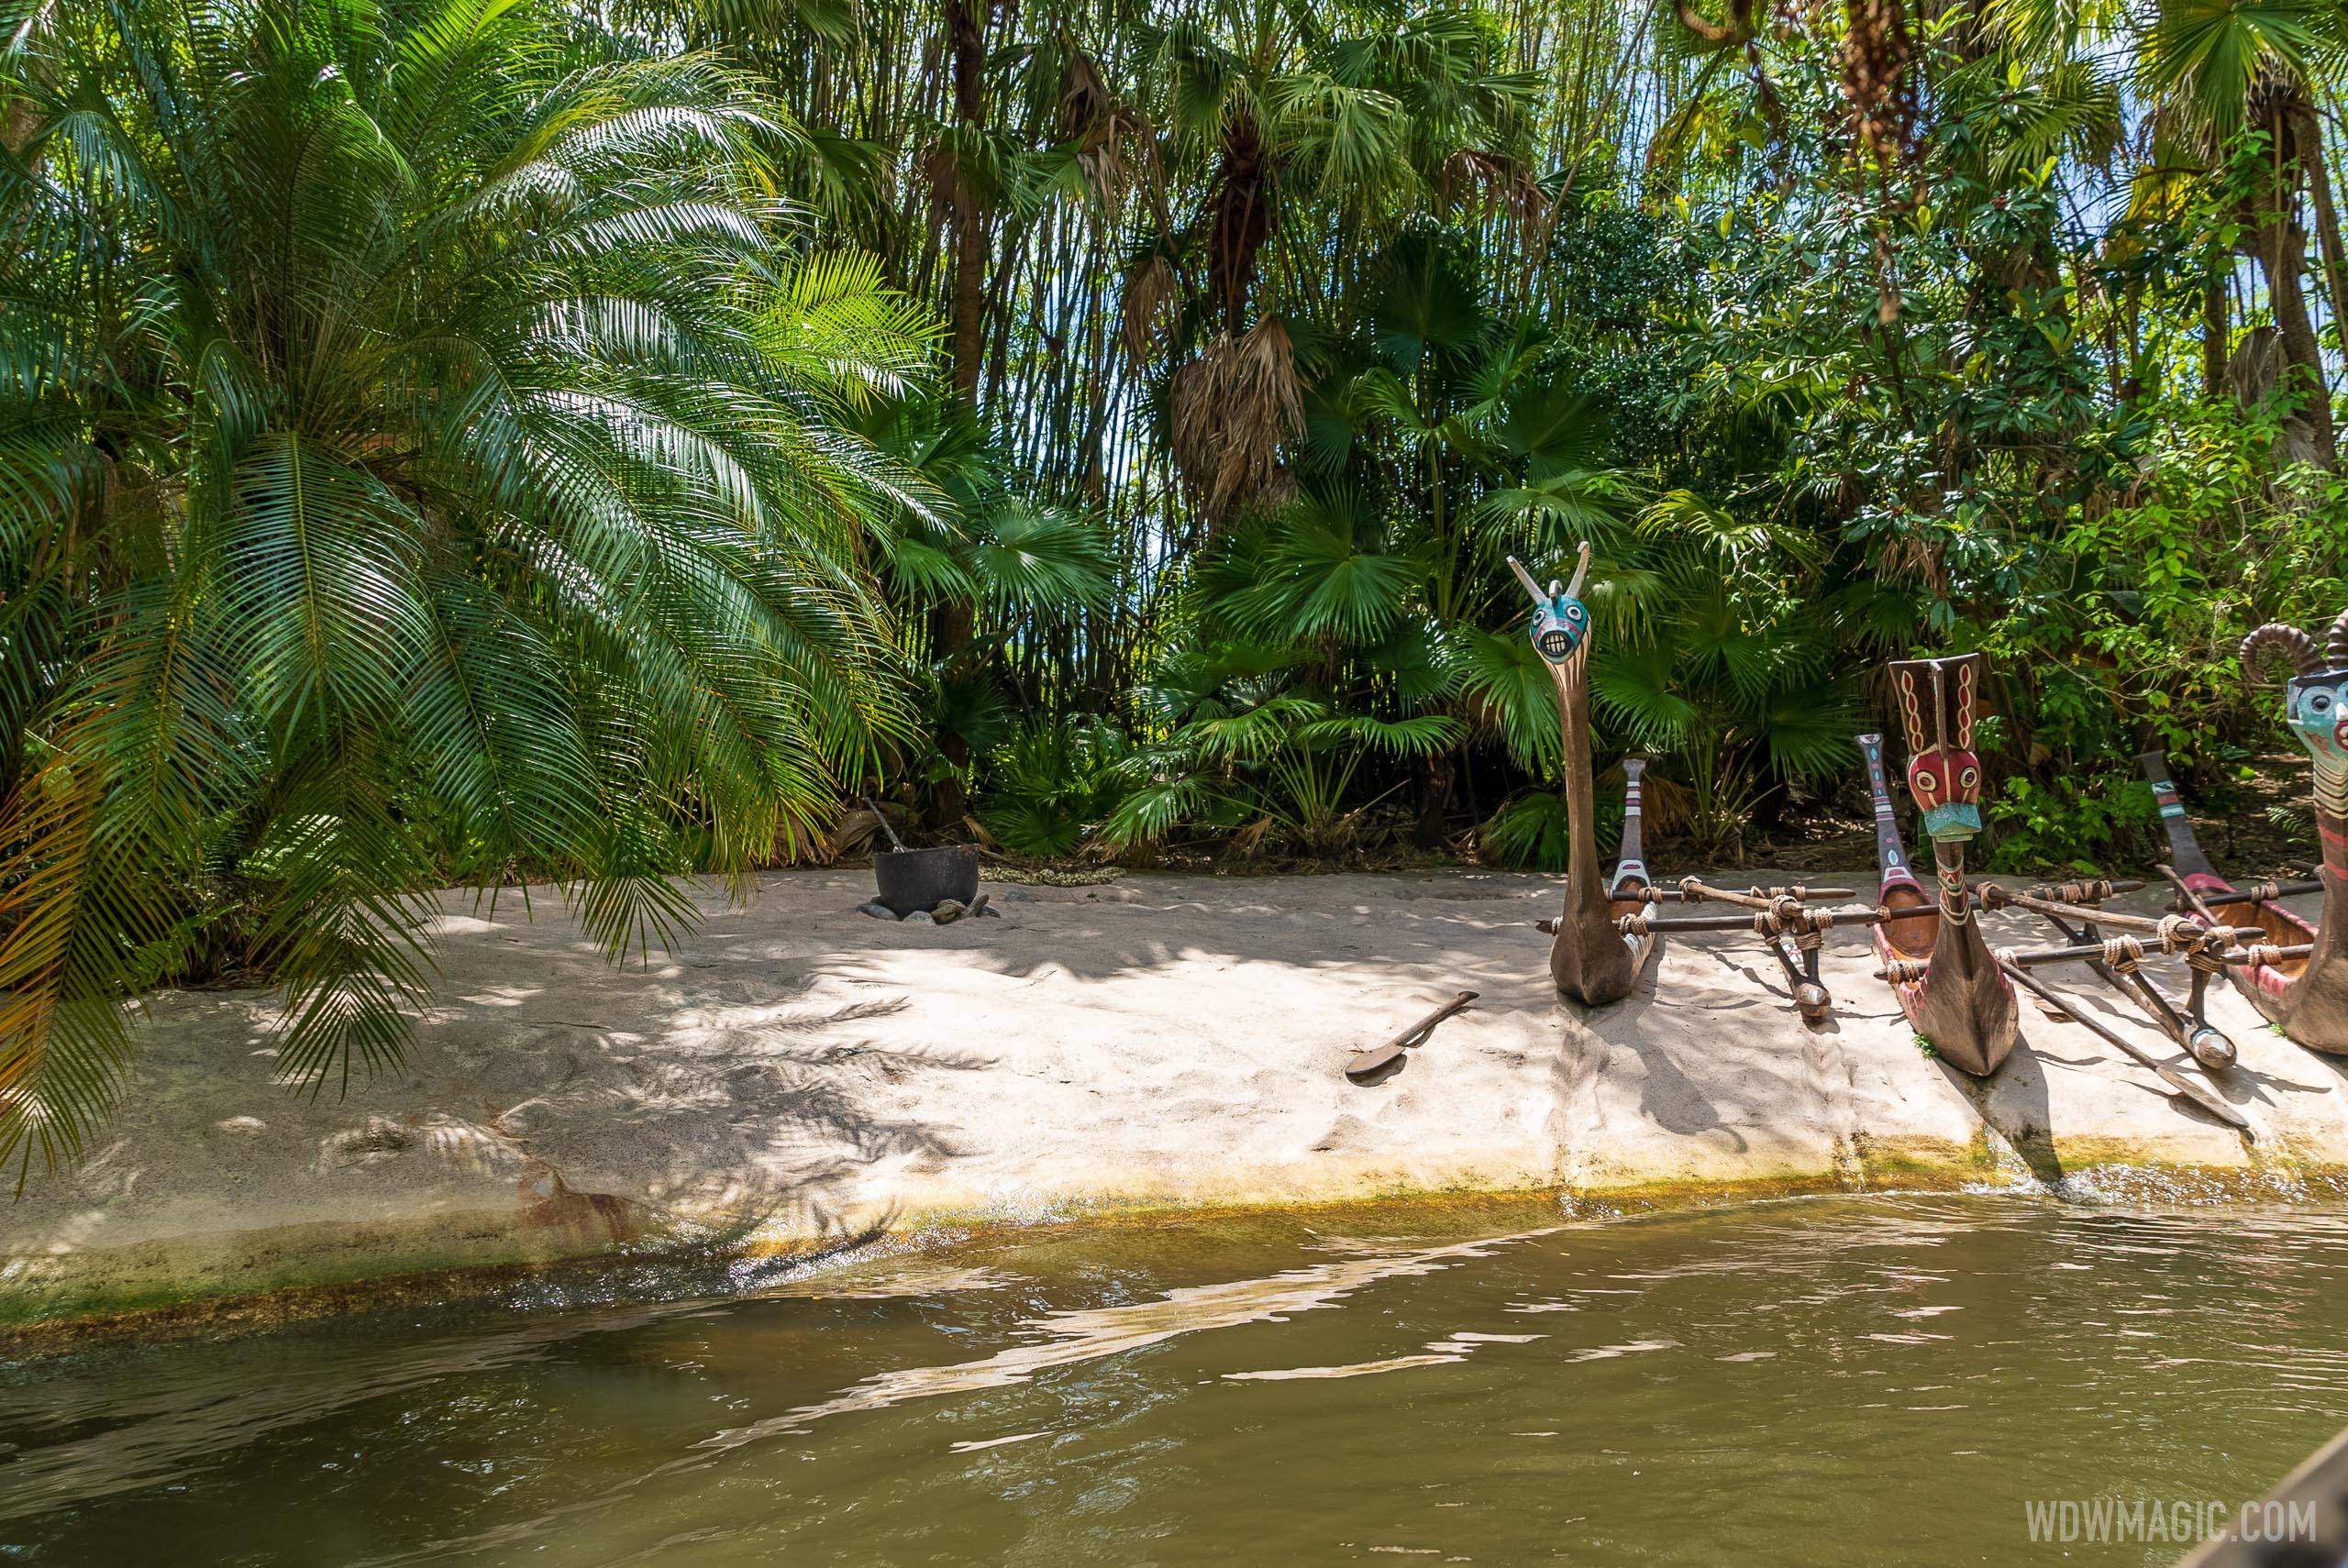 Summary of the changes so far at Disney World's Jungle Cruise